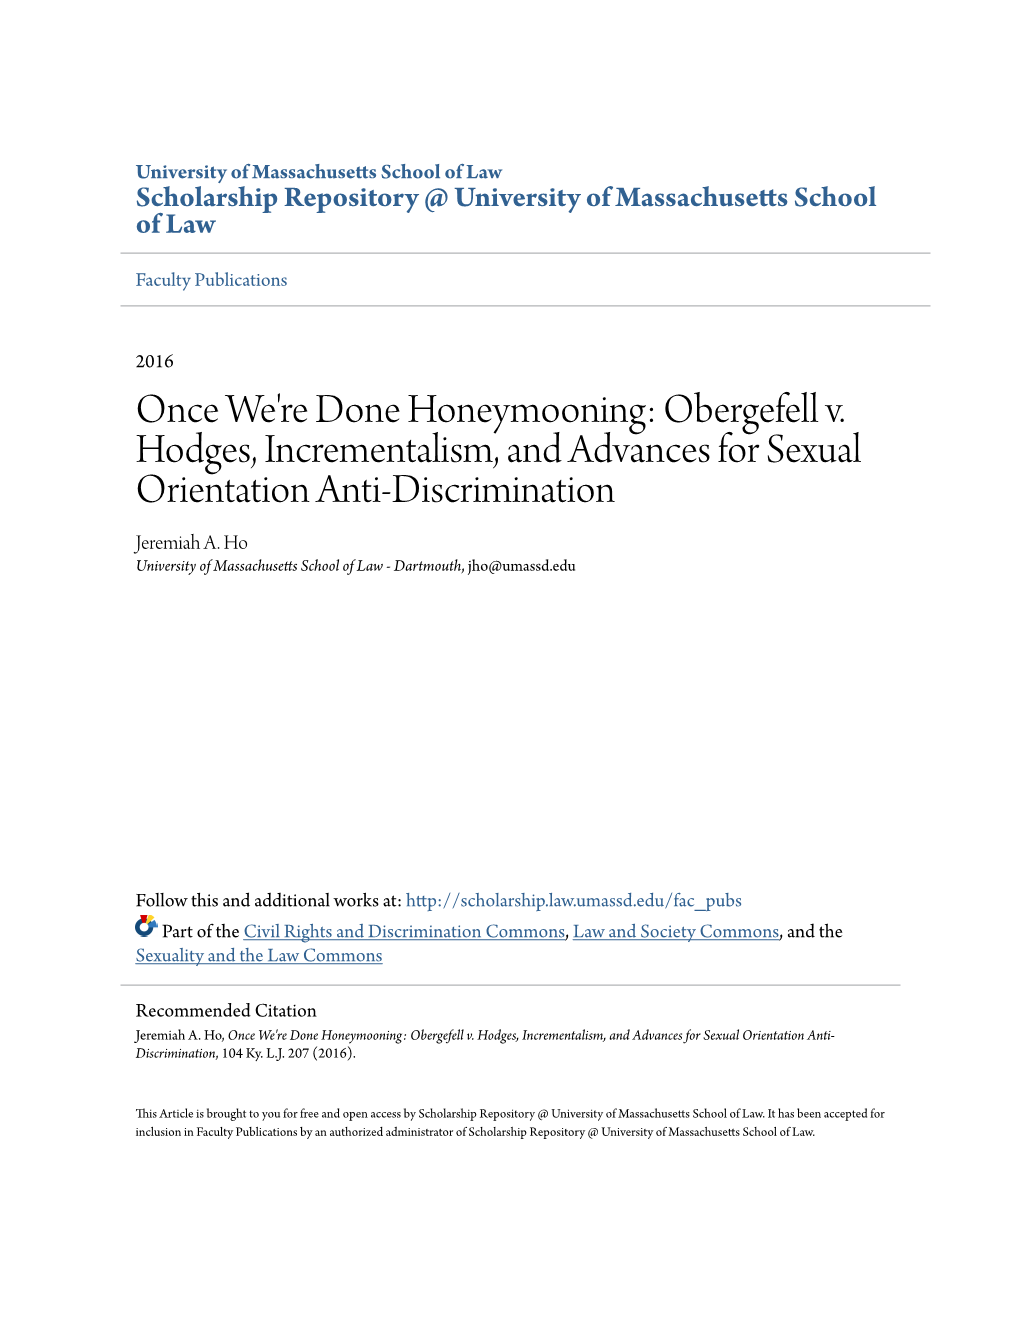 Obergefell V. Hodges, Incrementalism, and Advances for Sexual Orientation Anti-Discrimination Jeremiah A